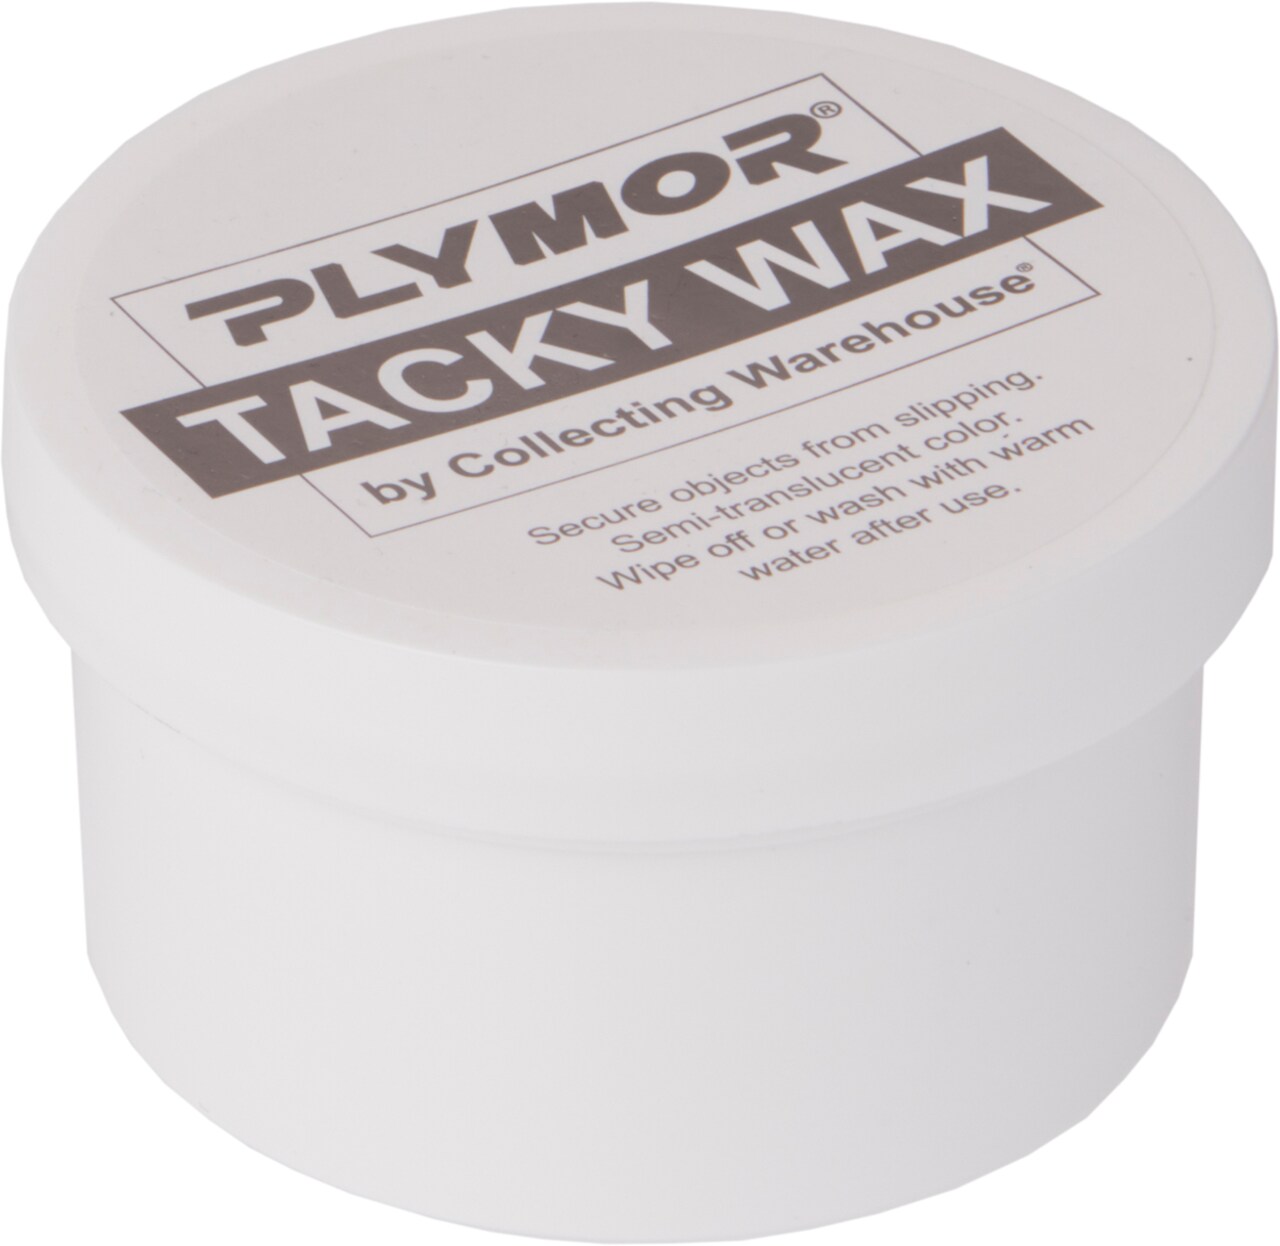 Plymor Tacky Wax Museum Adhesive Sticky Putty